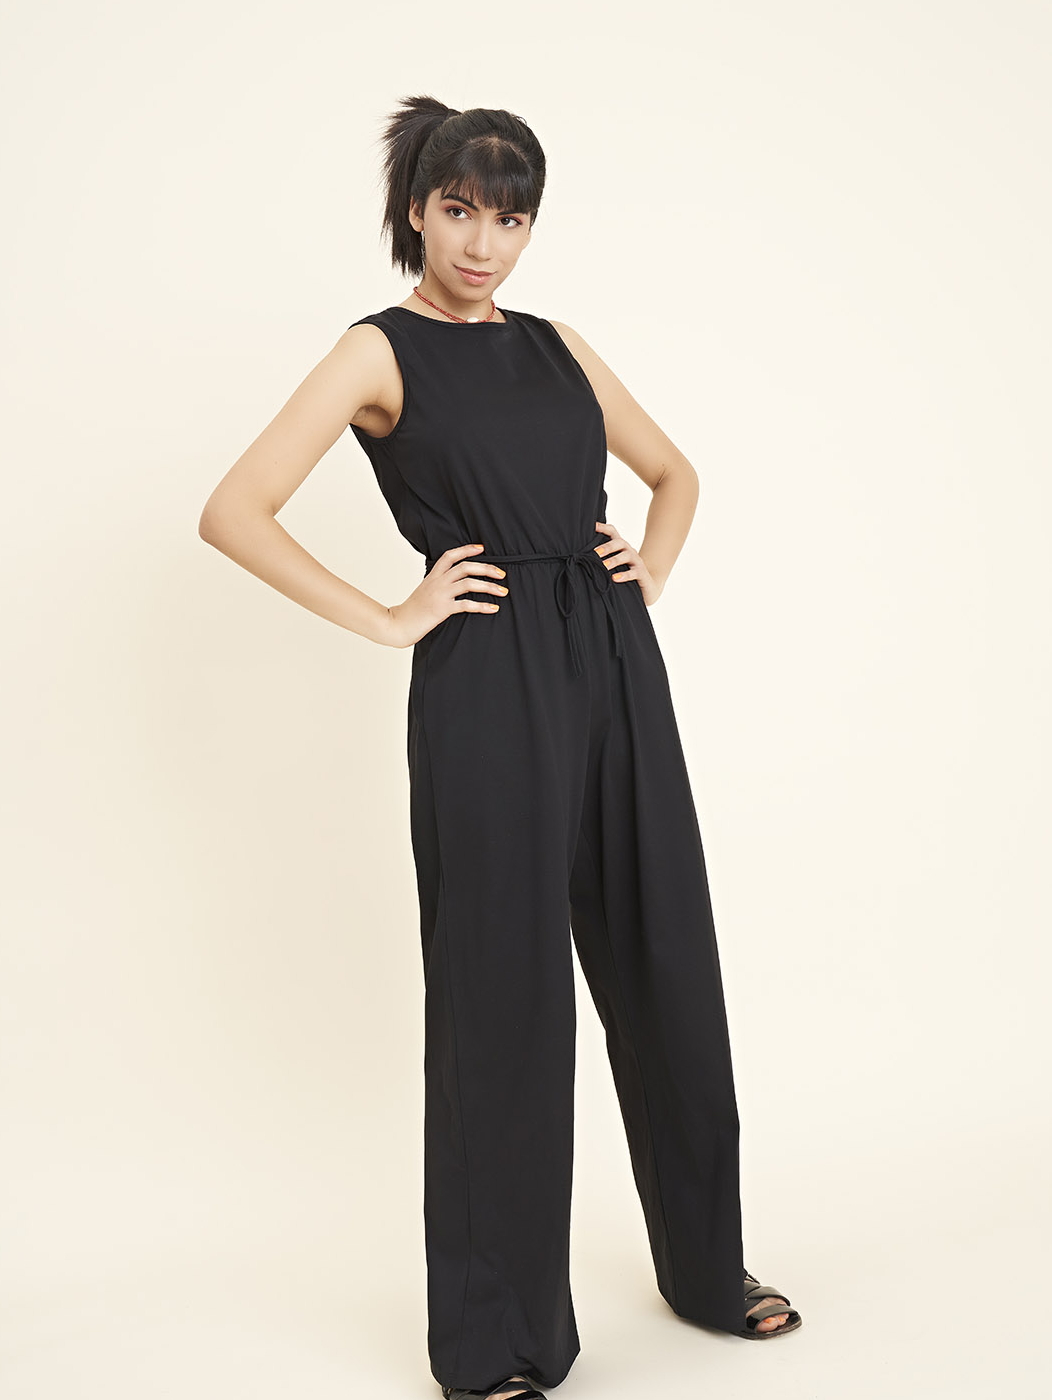 One garment for all occasions. Nali is our sleeveless jersey jumpsuit. It has an elasticated waist, which is also highlighted by the drawstring to be used as a belt. The front has a round neck, the back has a raw cut opening closed by a fabric drawstring.